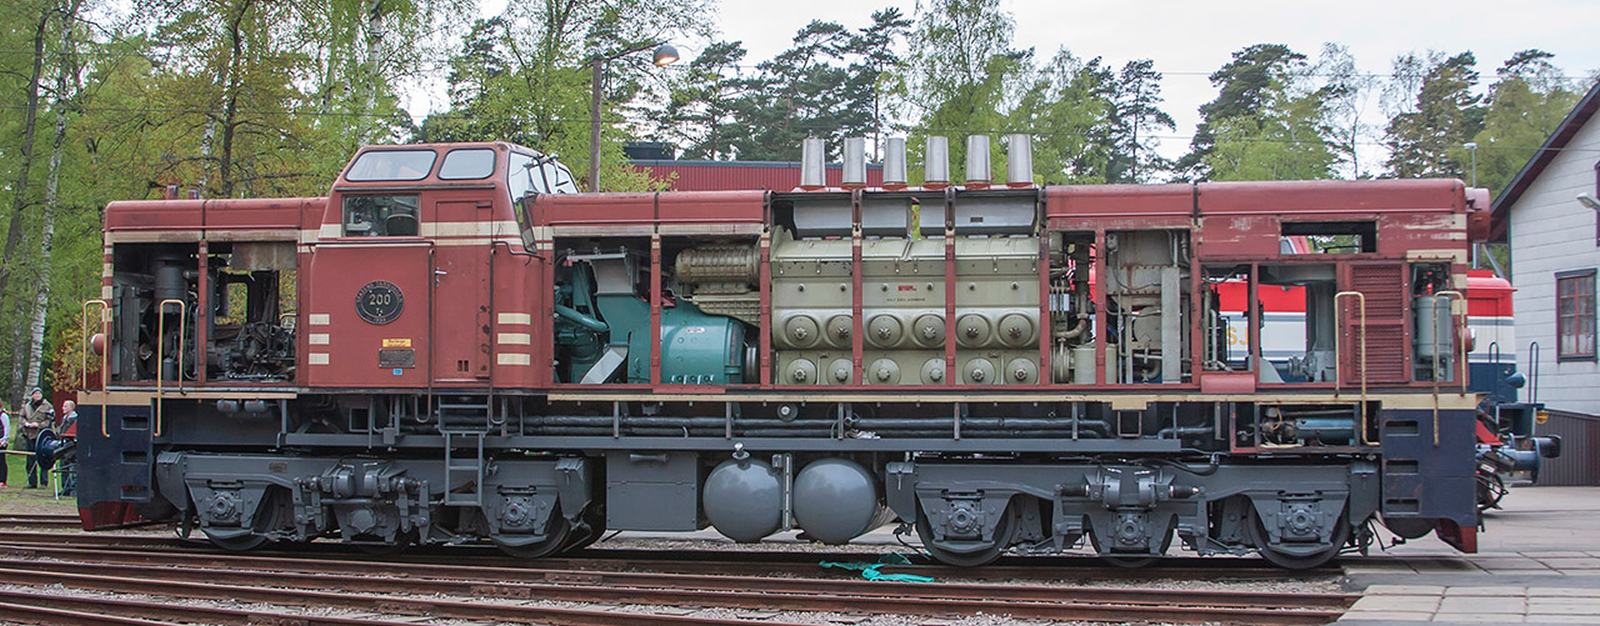 T41 200 with open hoods at Ängelholm Railway Museum